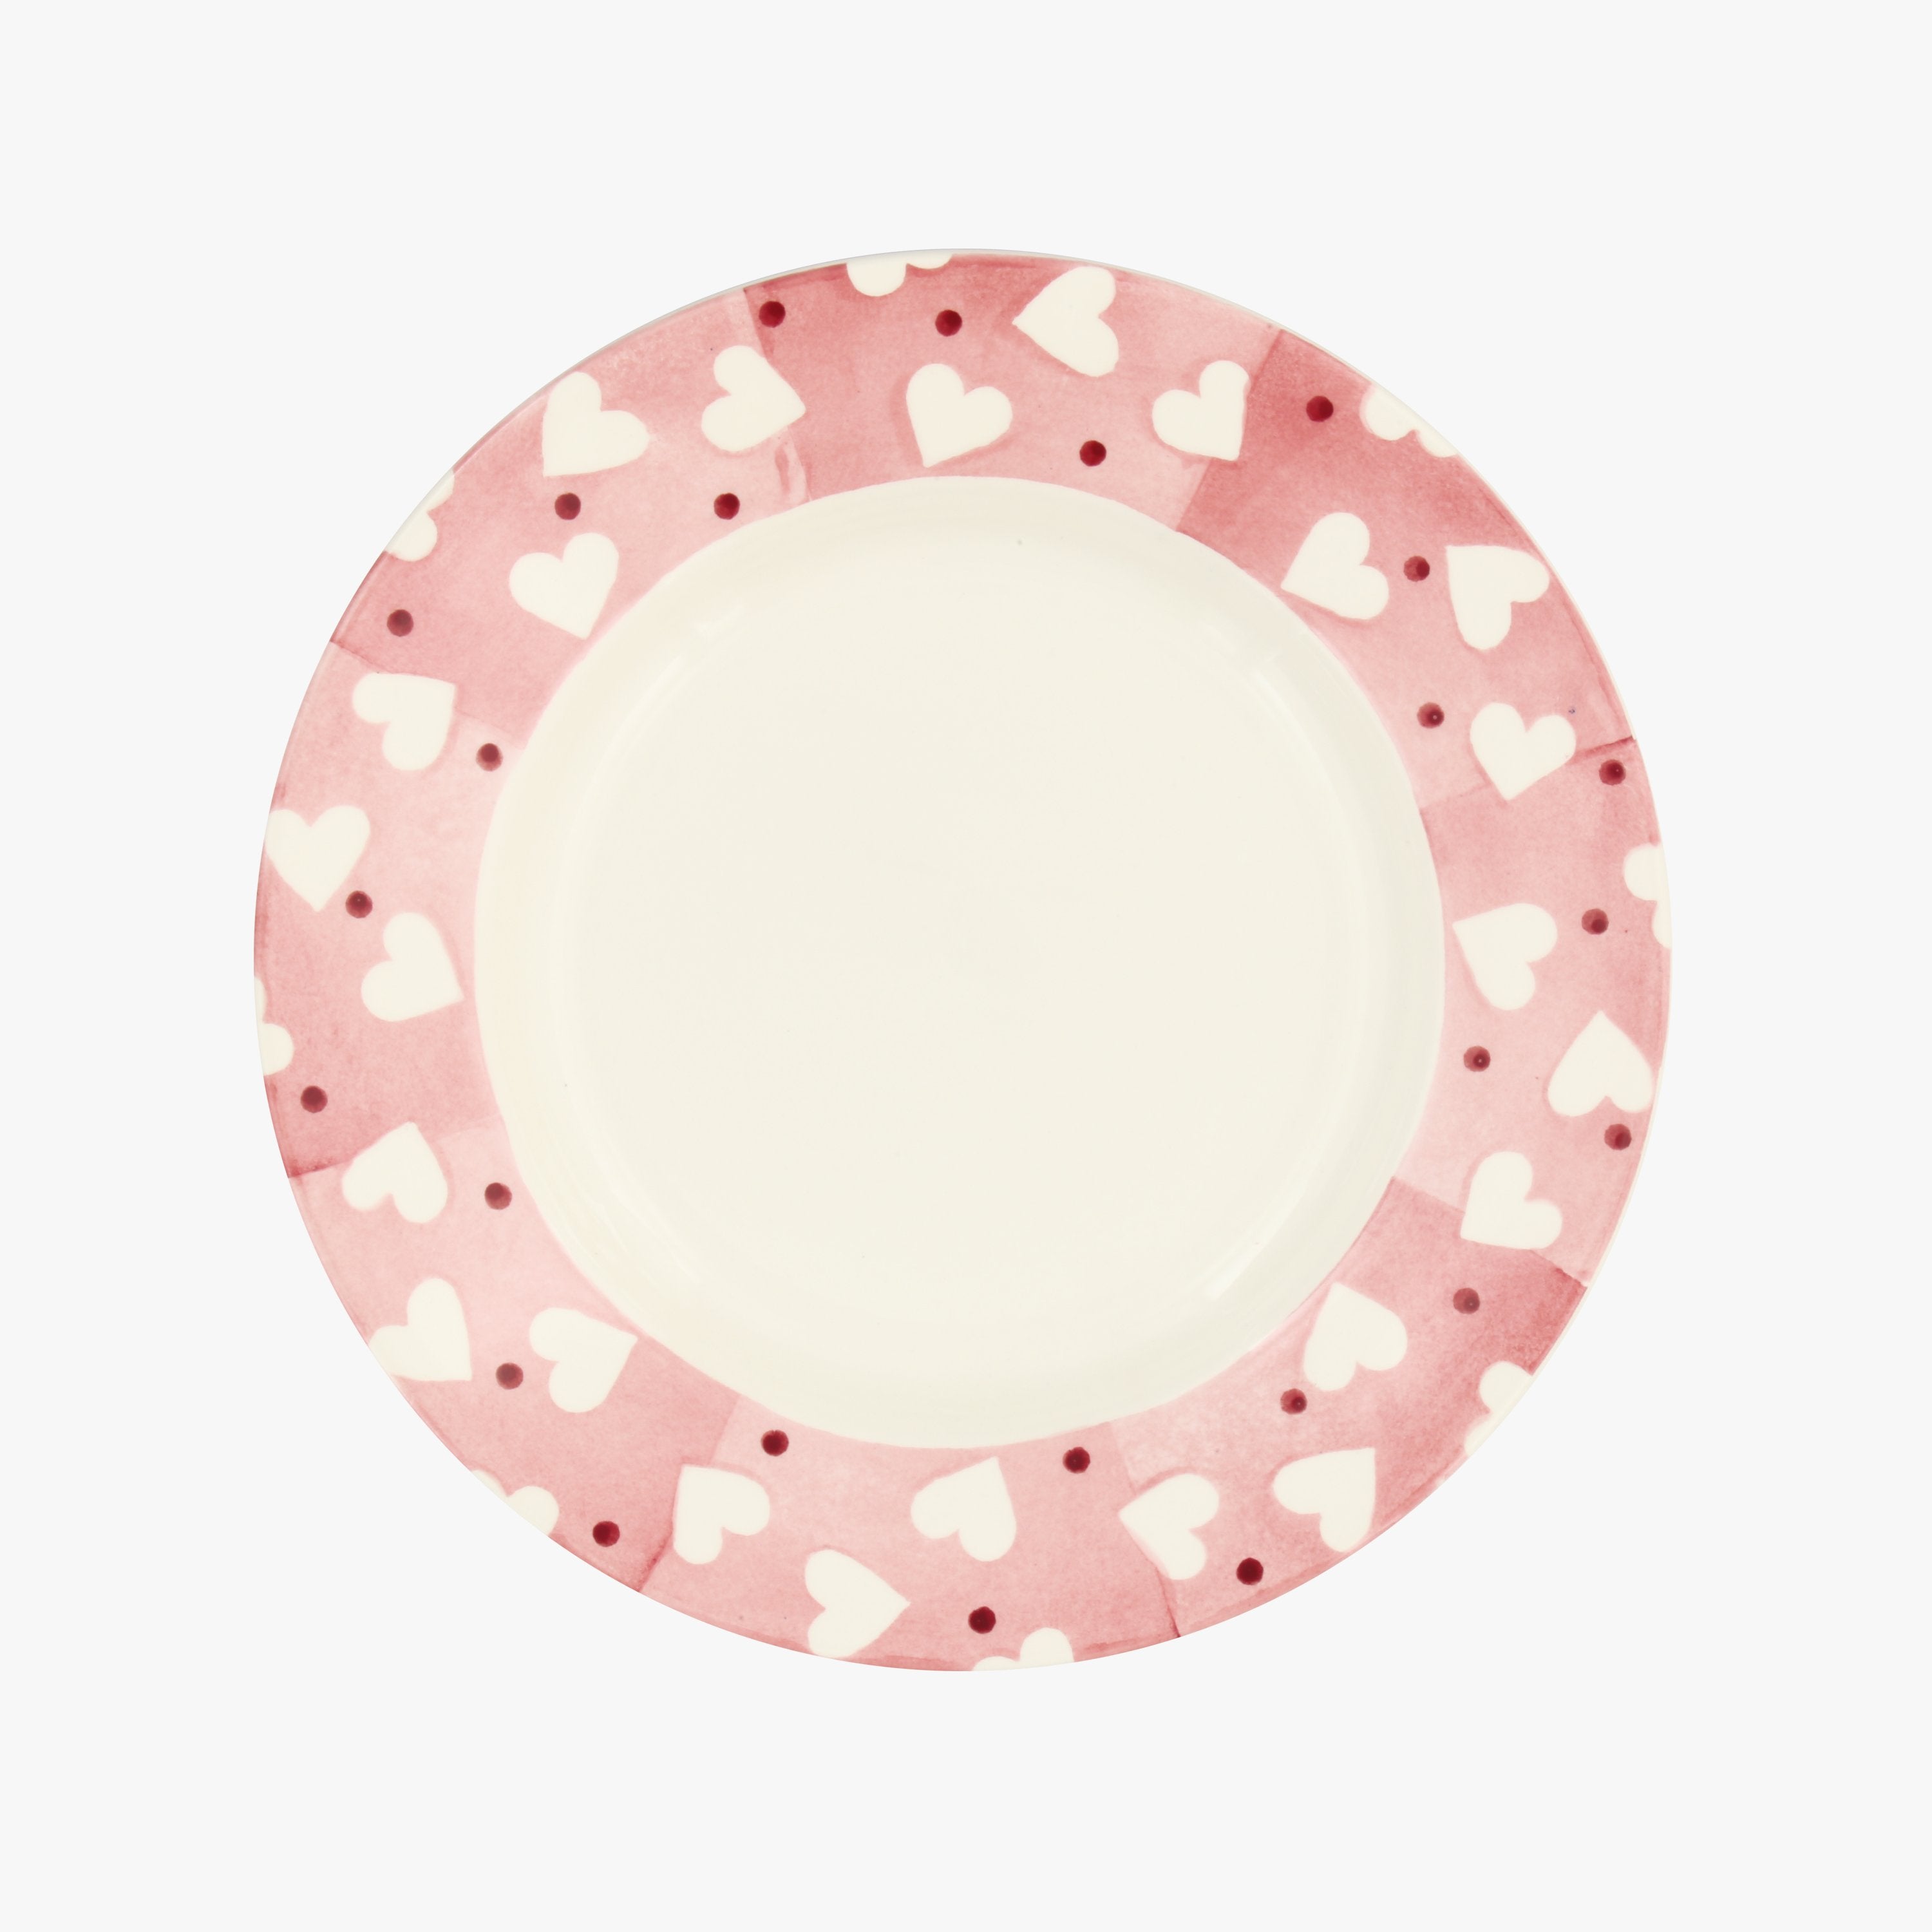 Pink Hearts & Dots 8 1/2 Inch Plate